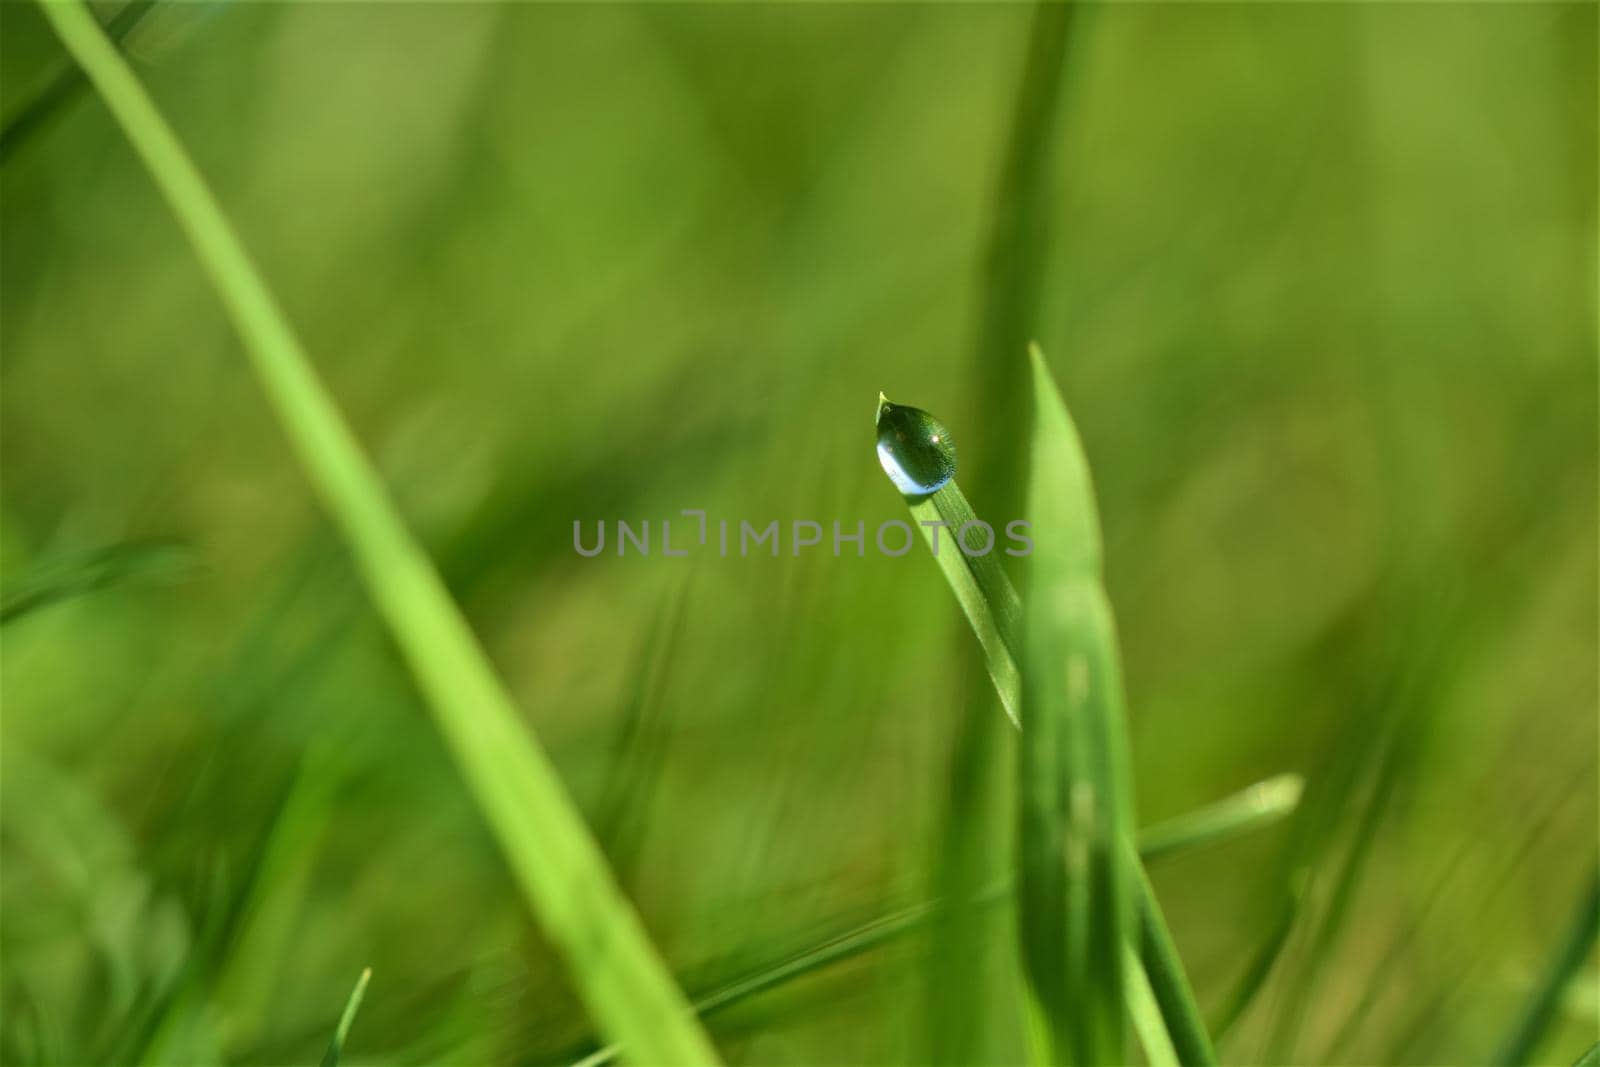 Dew drop on blade of grass against a green blurred background by Luise123